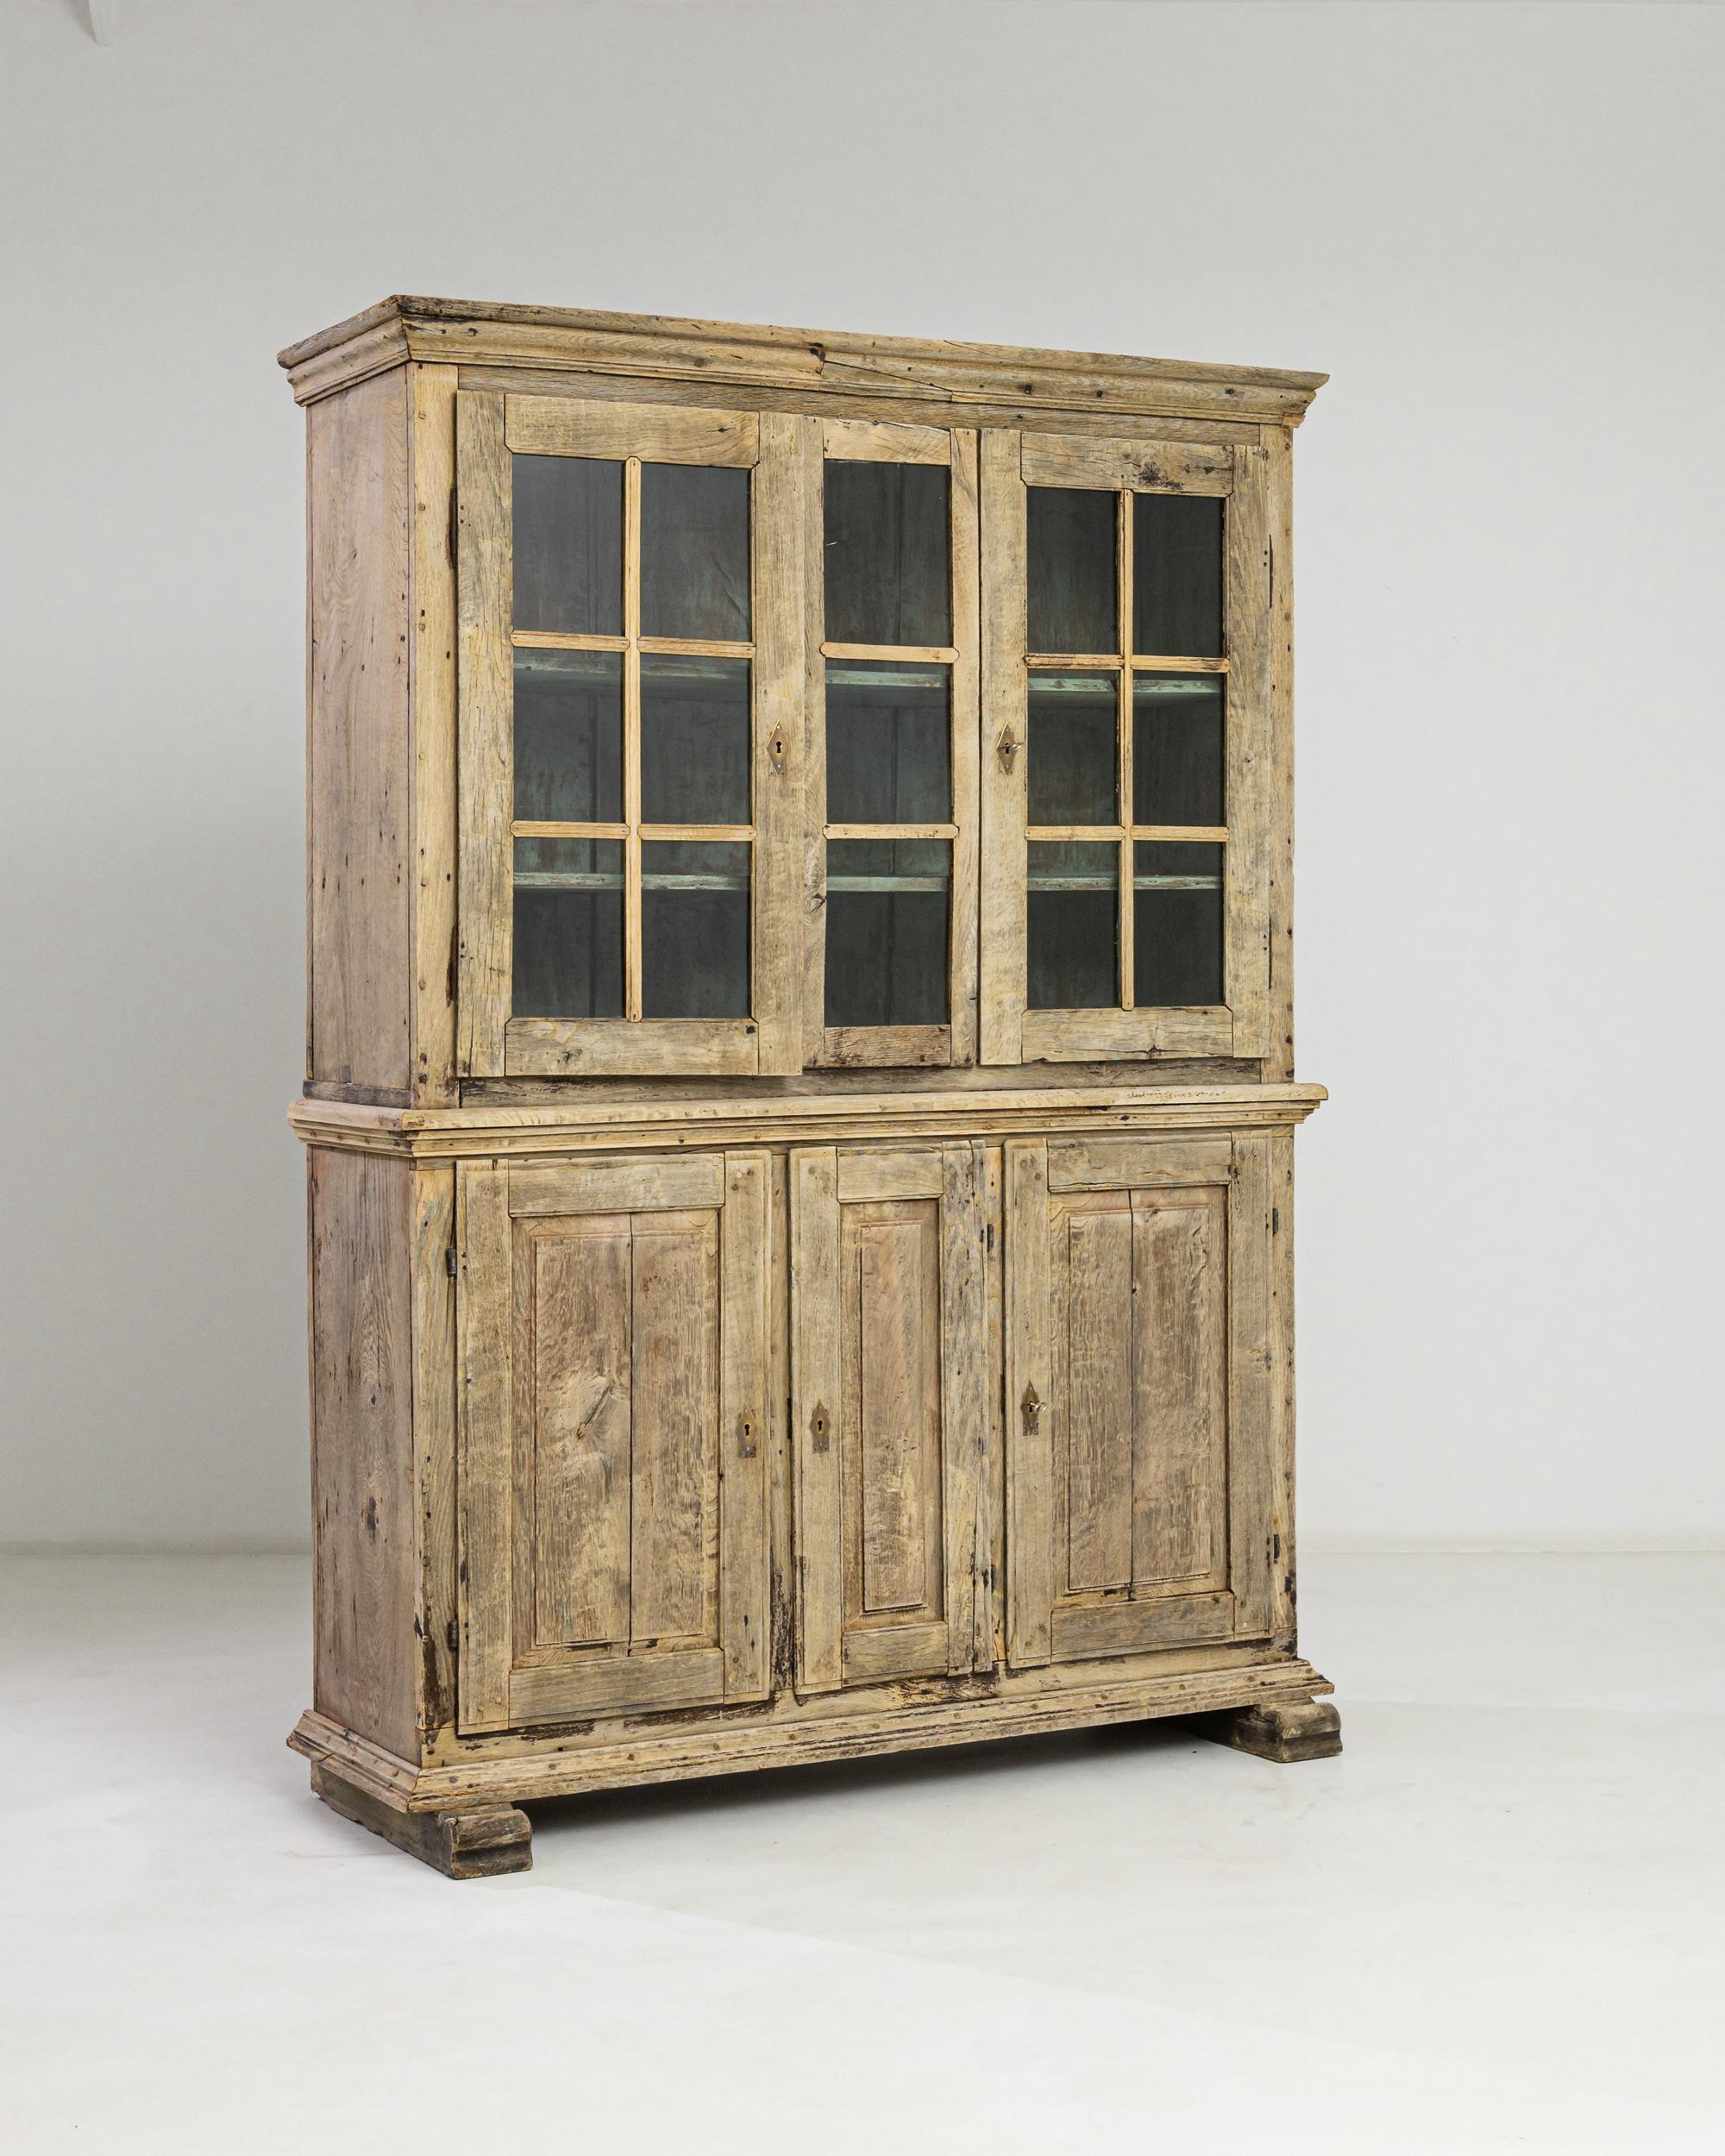 Step into the elegance of the 1840s with the German Bleached Oak Vitrine, a timeless showcase of craftsmanship. Below, three solid cabinet doors discreetly house treasures, flanked by single shelves on each side and a trio of shelves in the center.